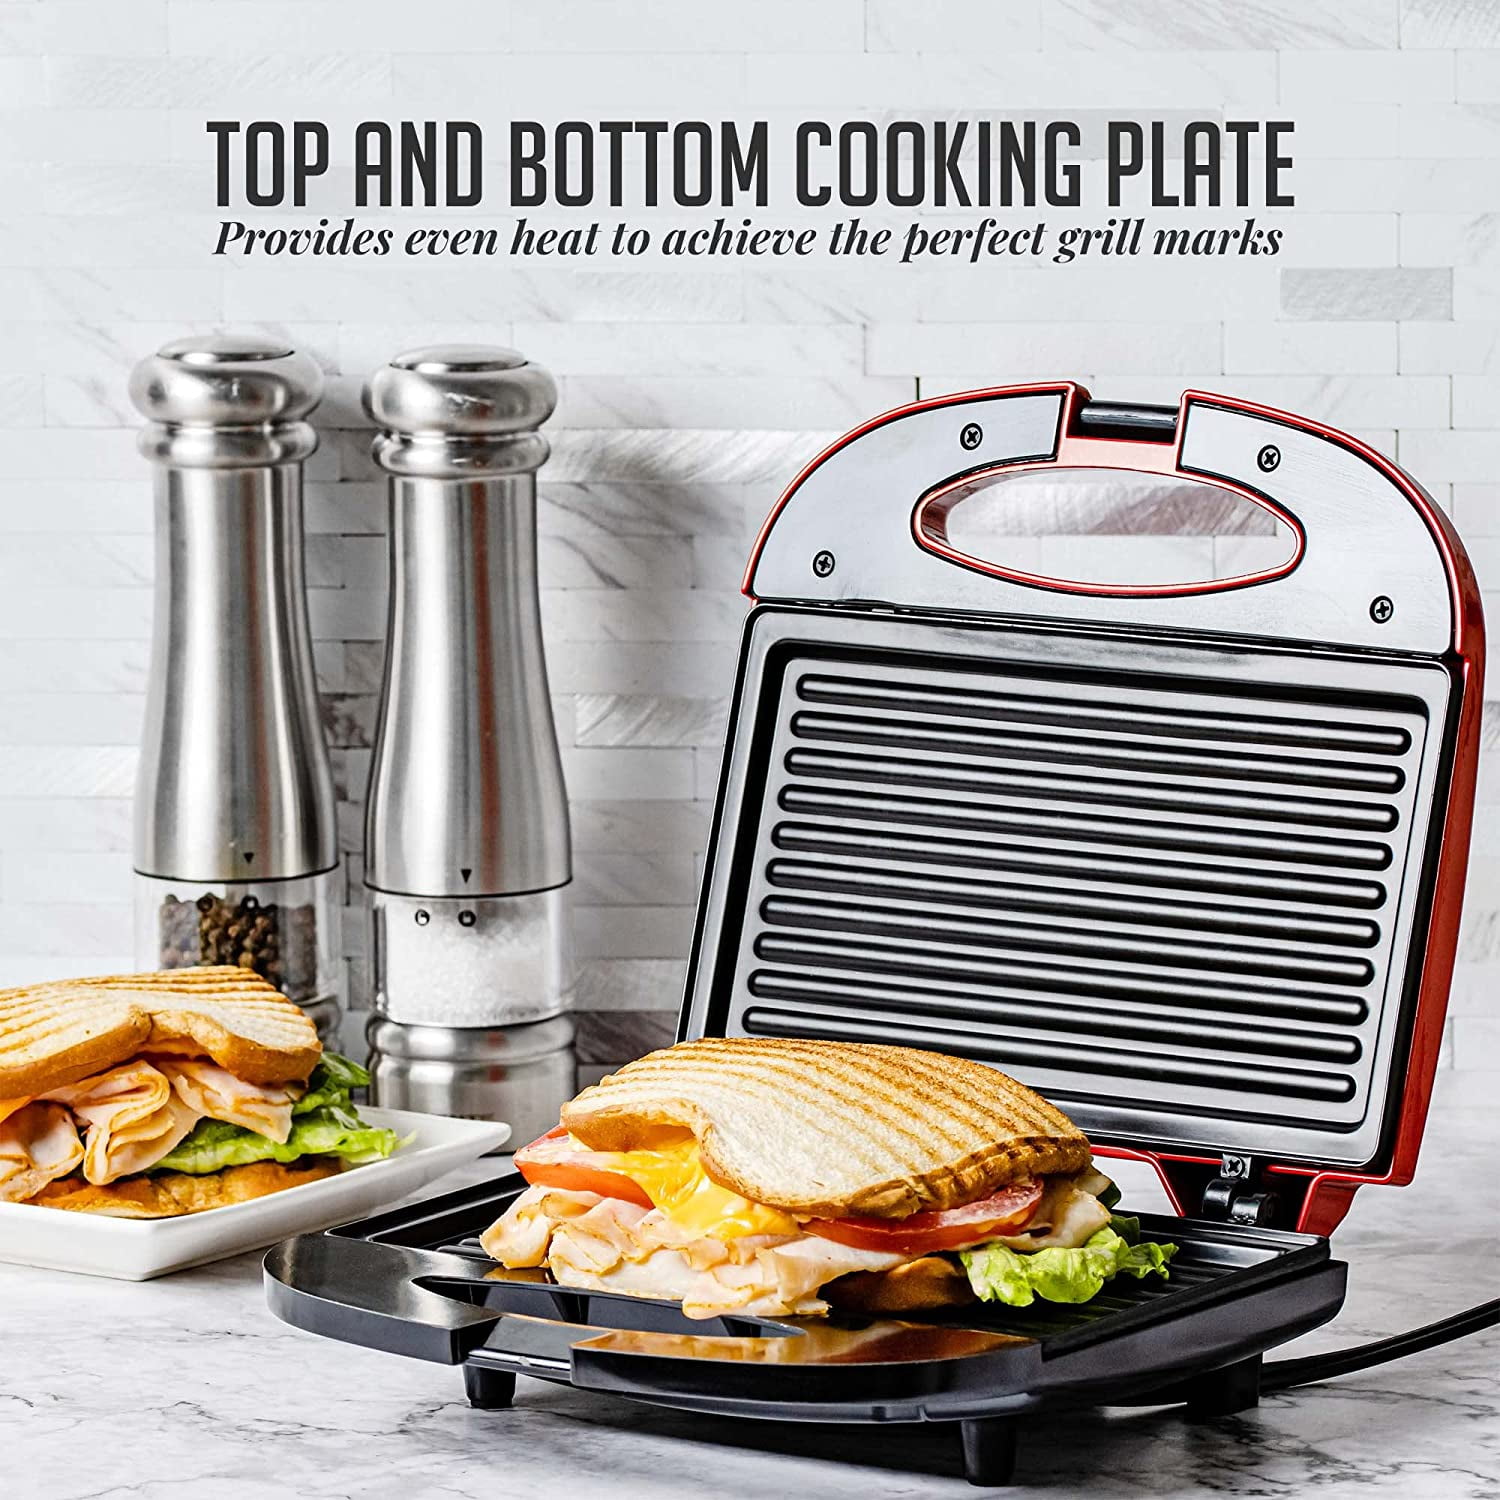 Ovente Electric Indoor Sandwich Grill Waffle Maker Set with 3